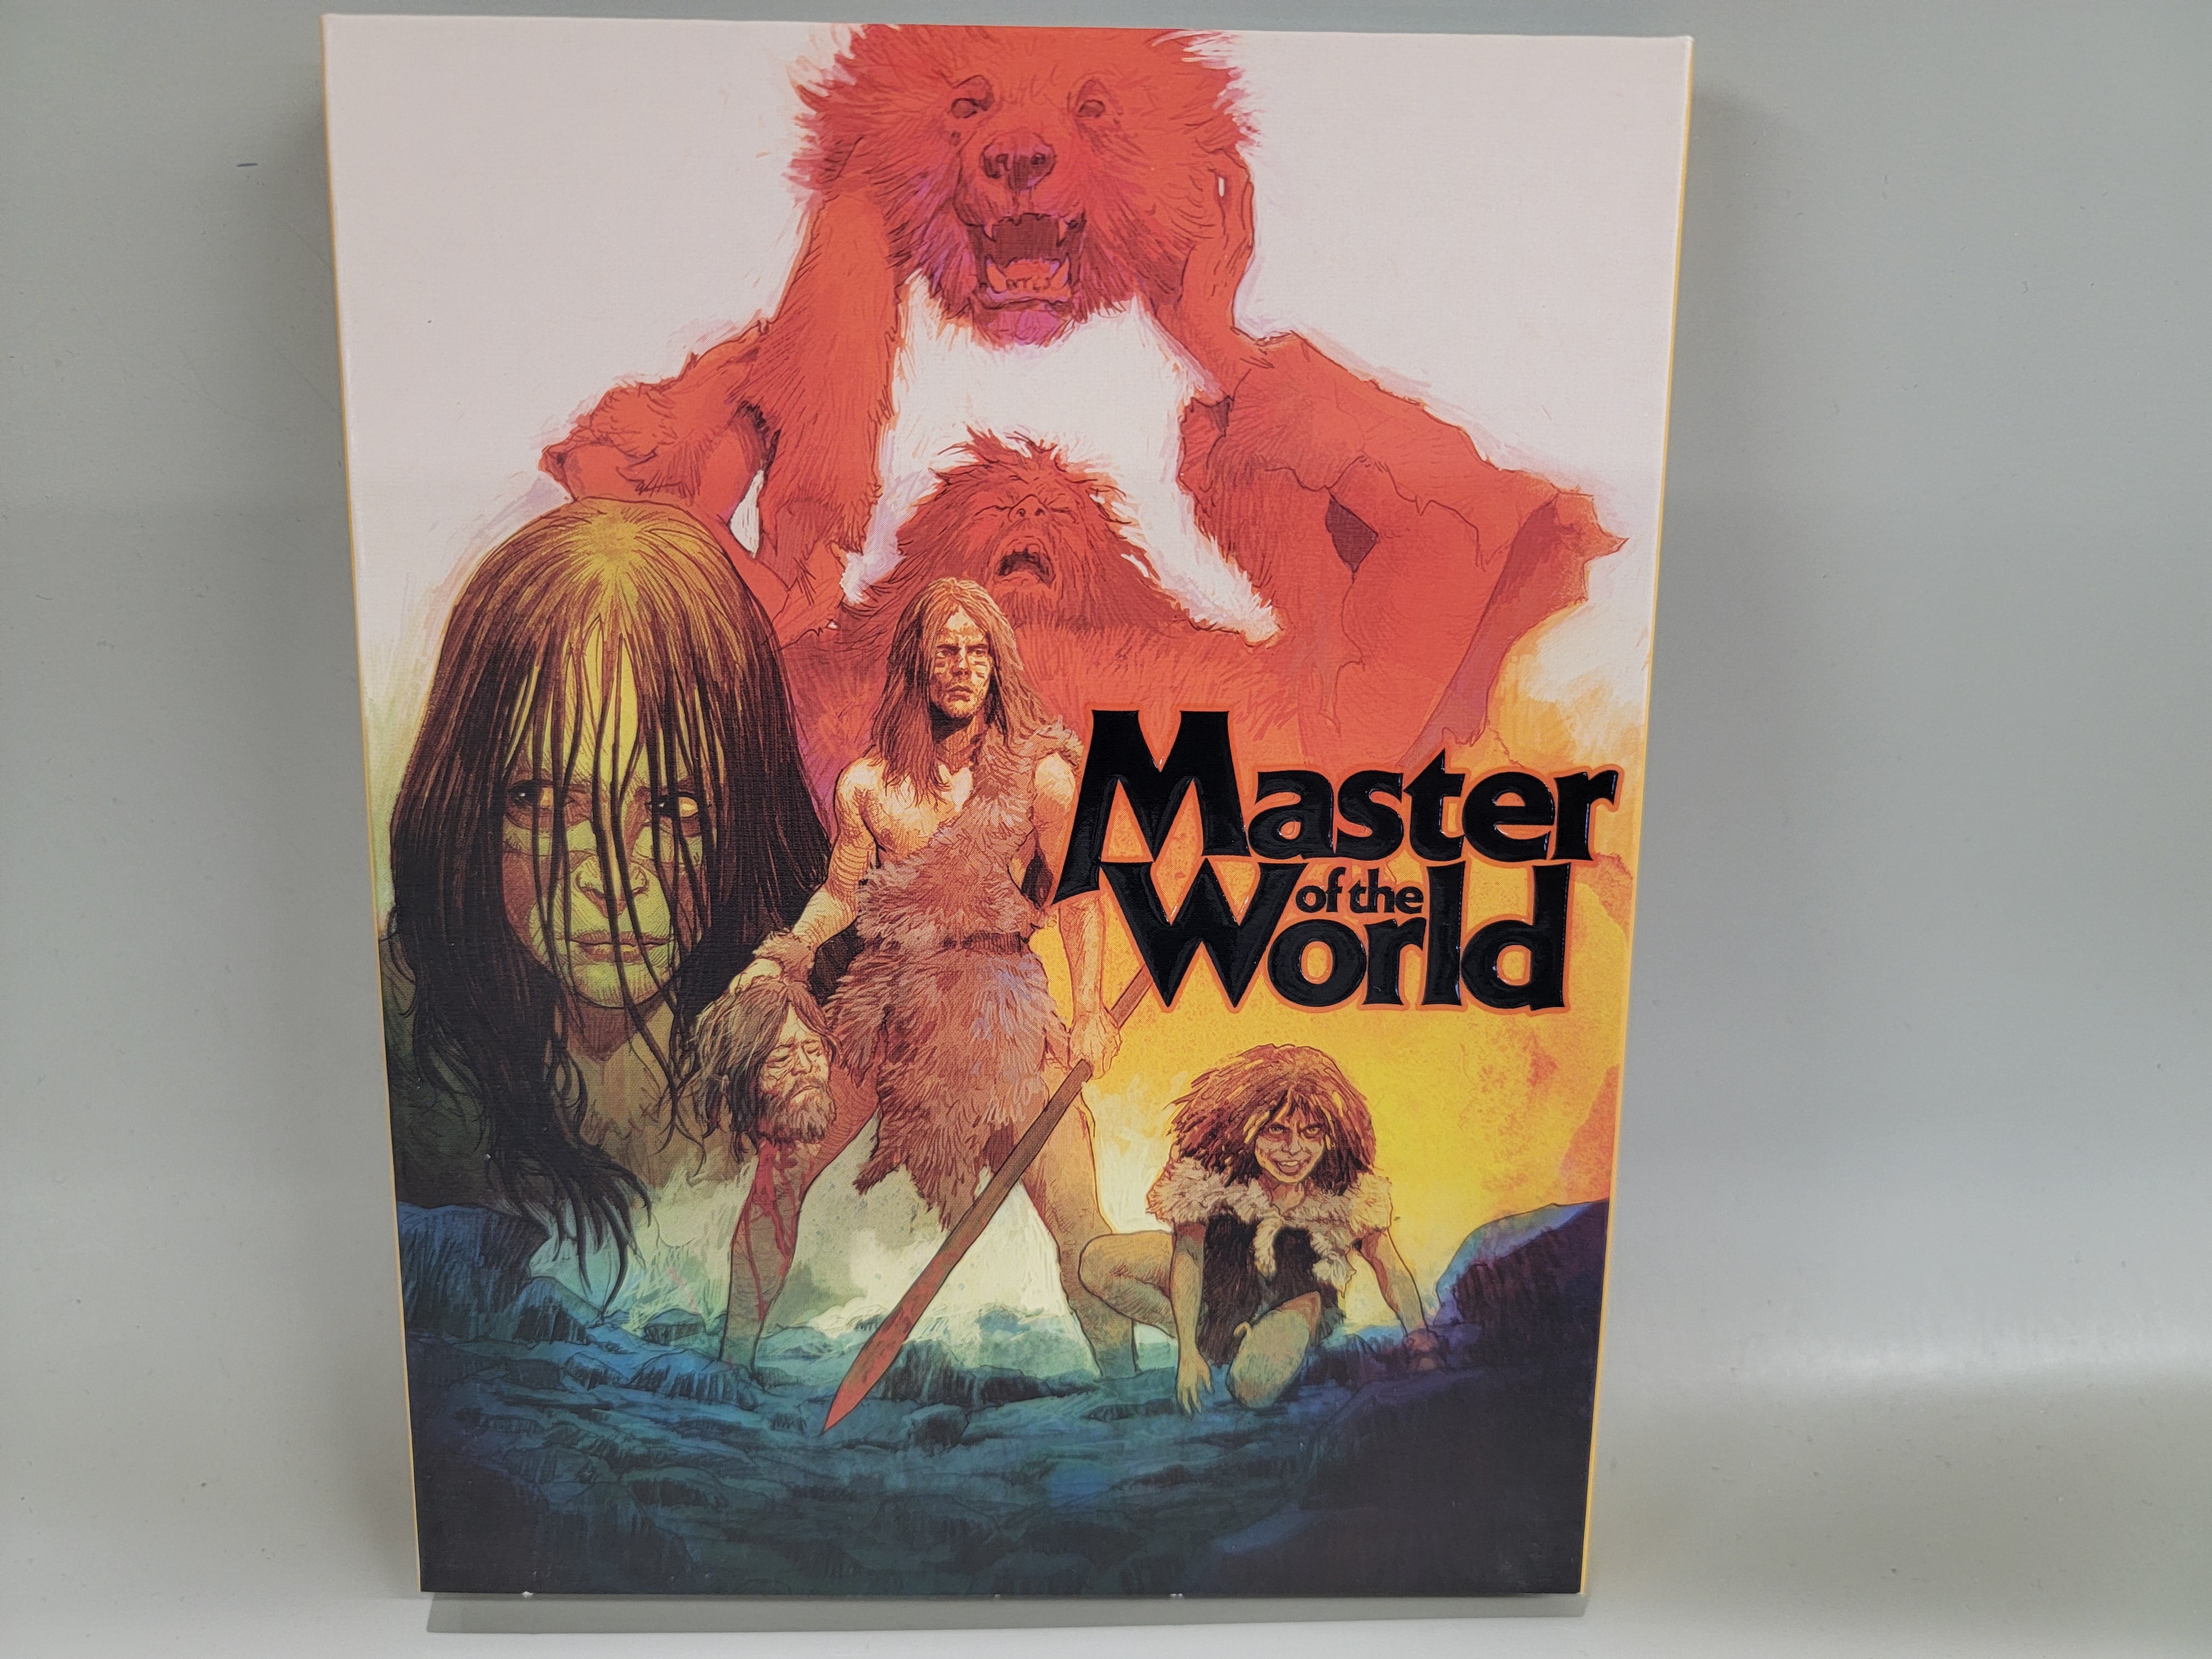 MASTER OF THE WORLD (LIMITED EDITION) BLU-RAY [USED]